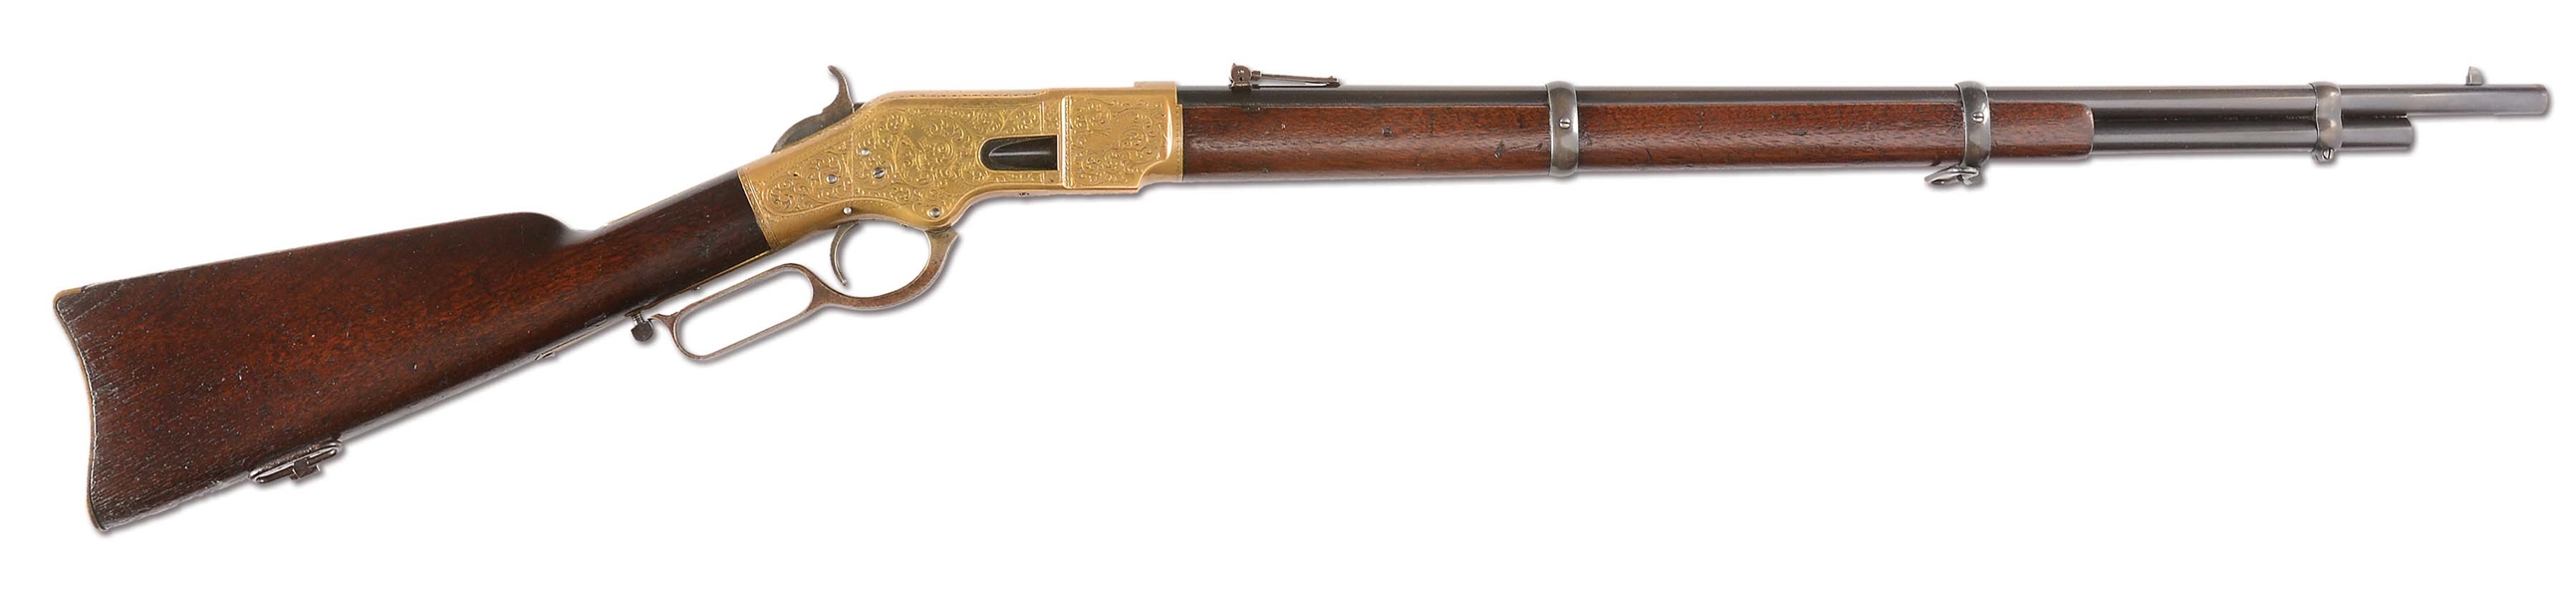 (A) WINCHESTER 1866 LEVER-ACTION MUSKET.